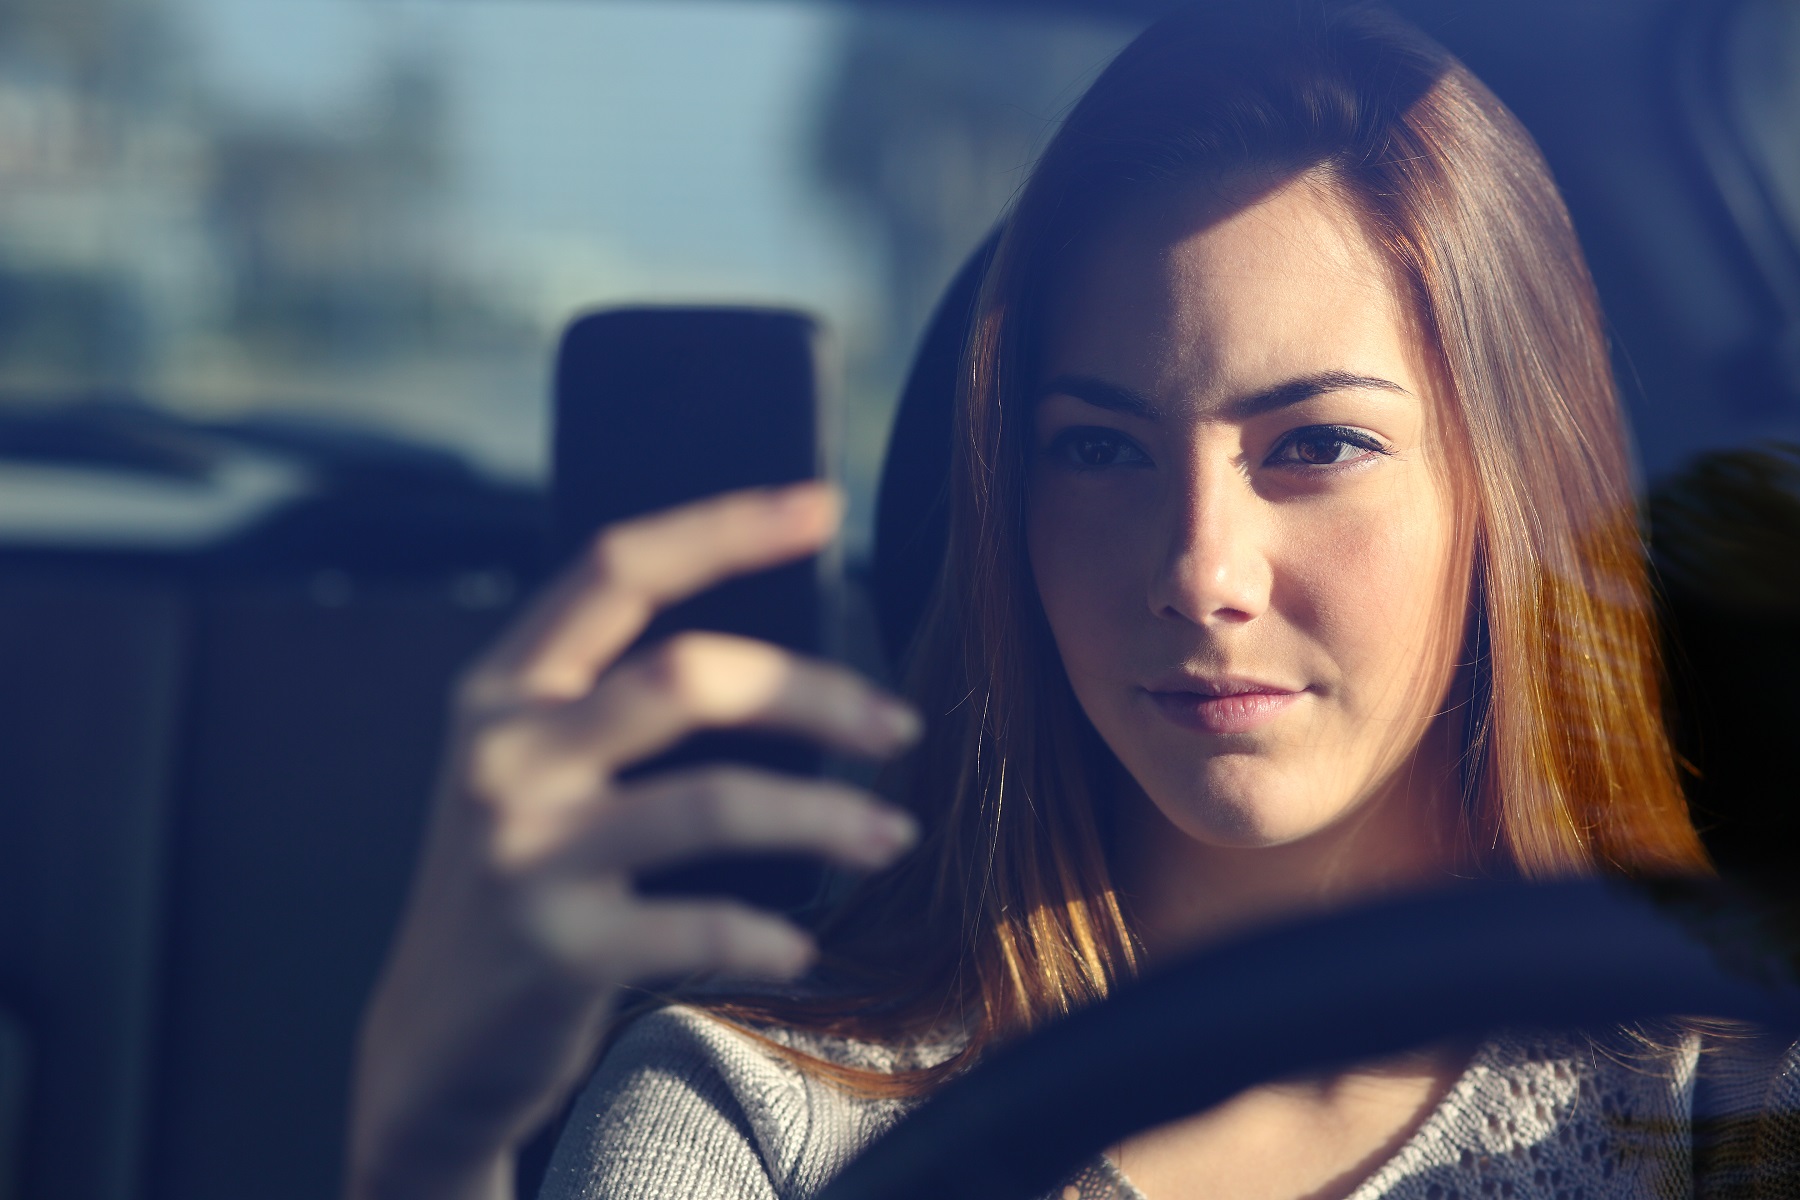 Front view of a woman driving a car and typing on a smart phone